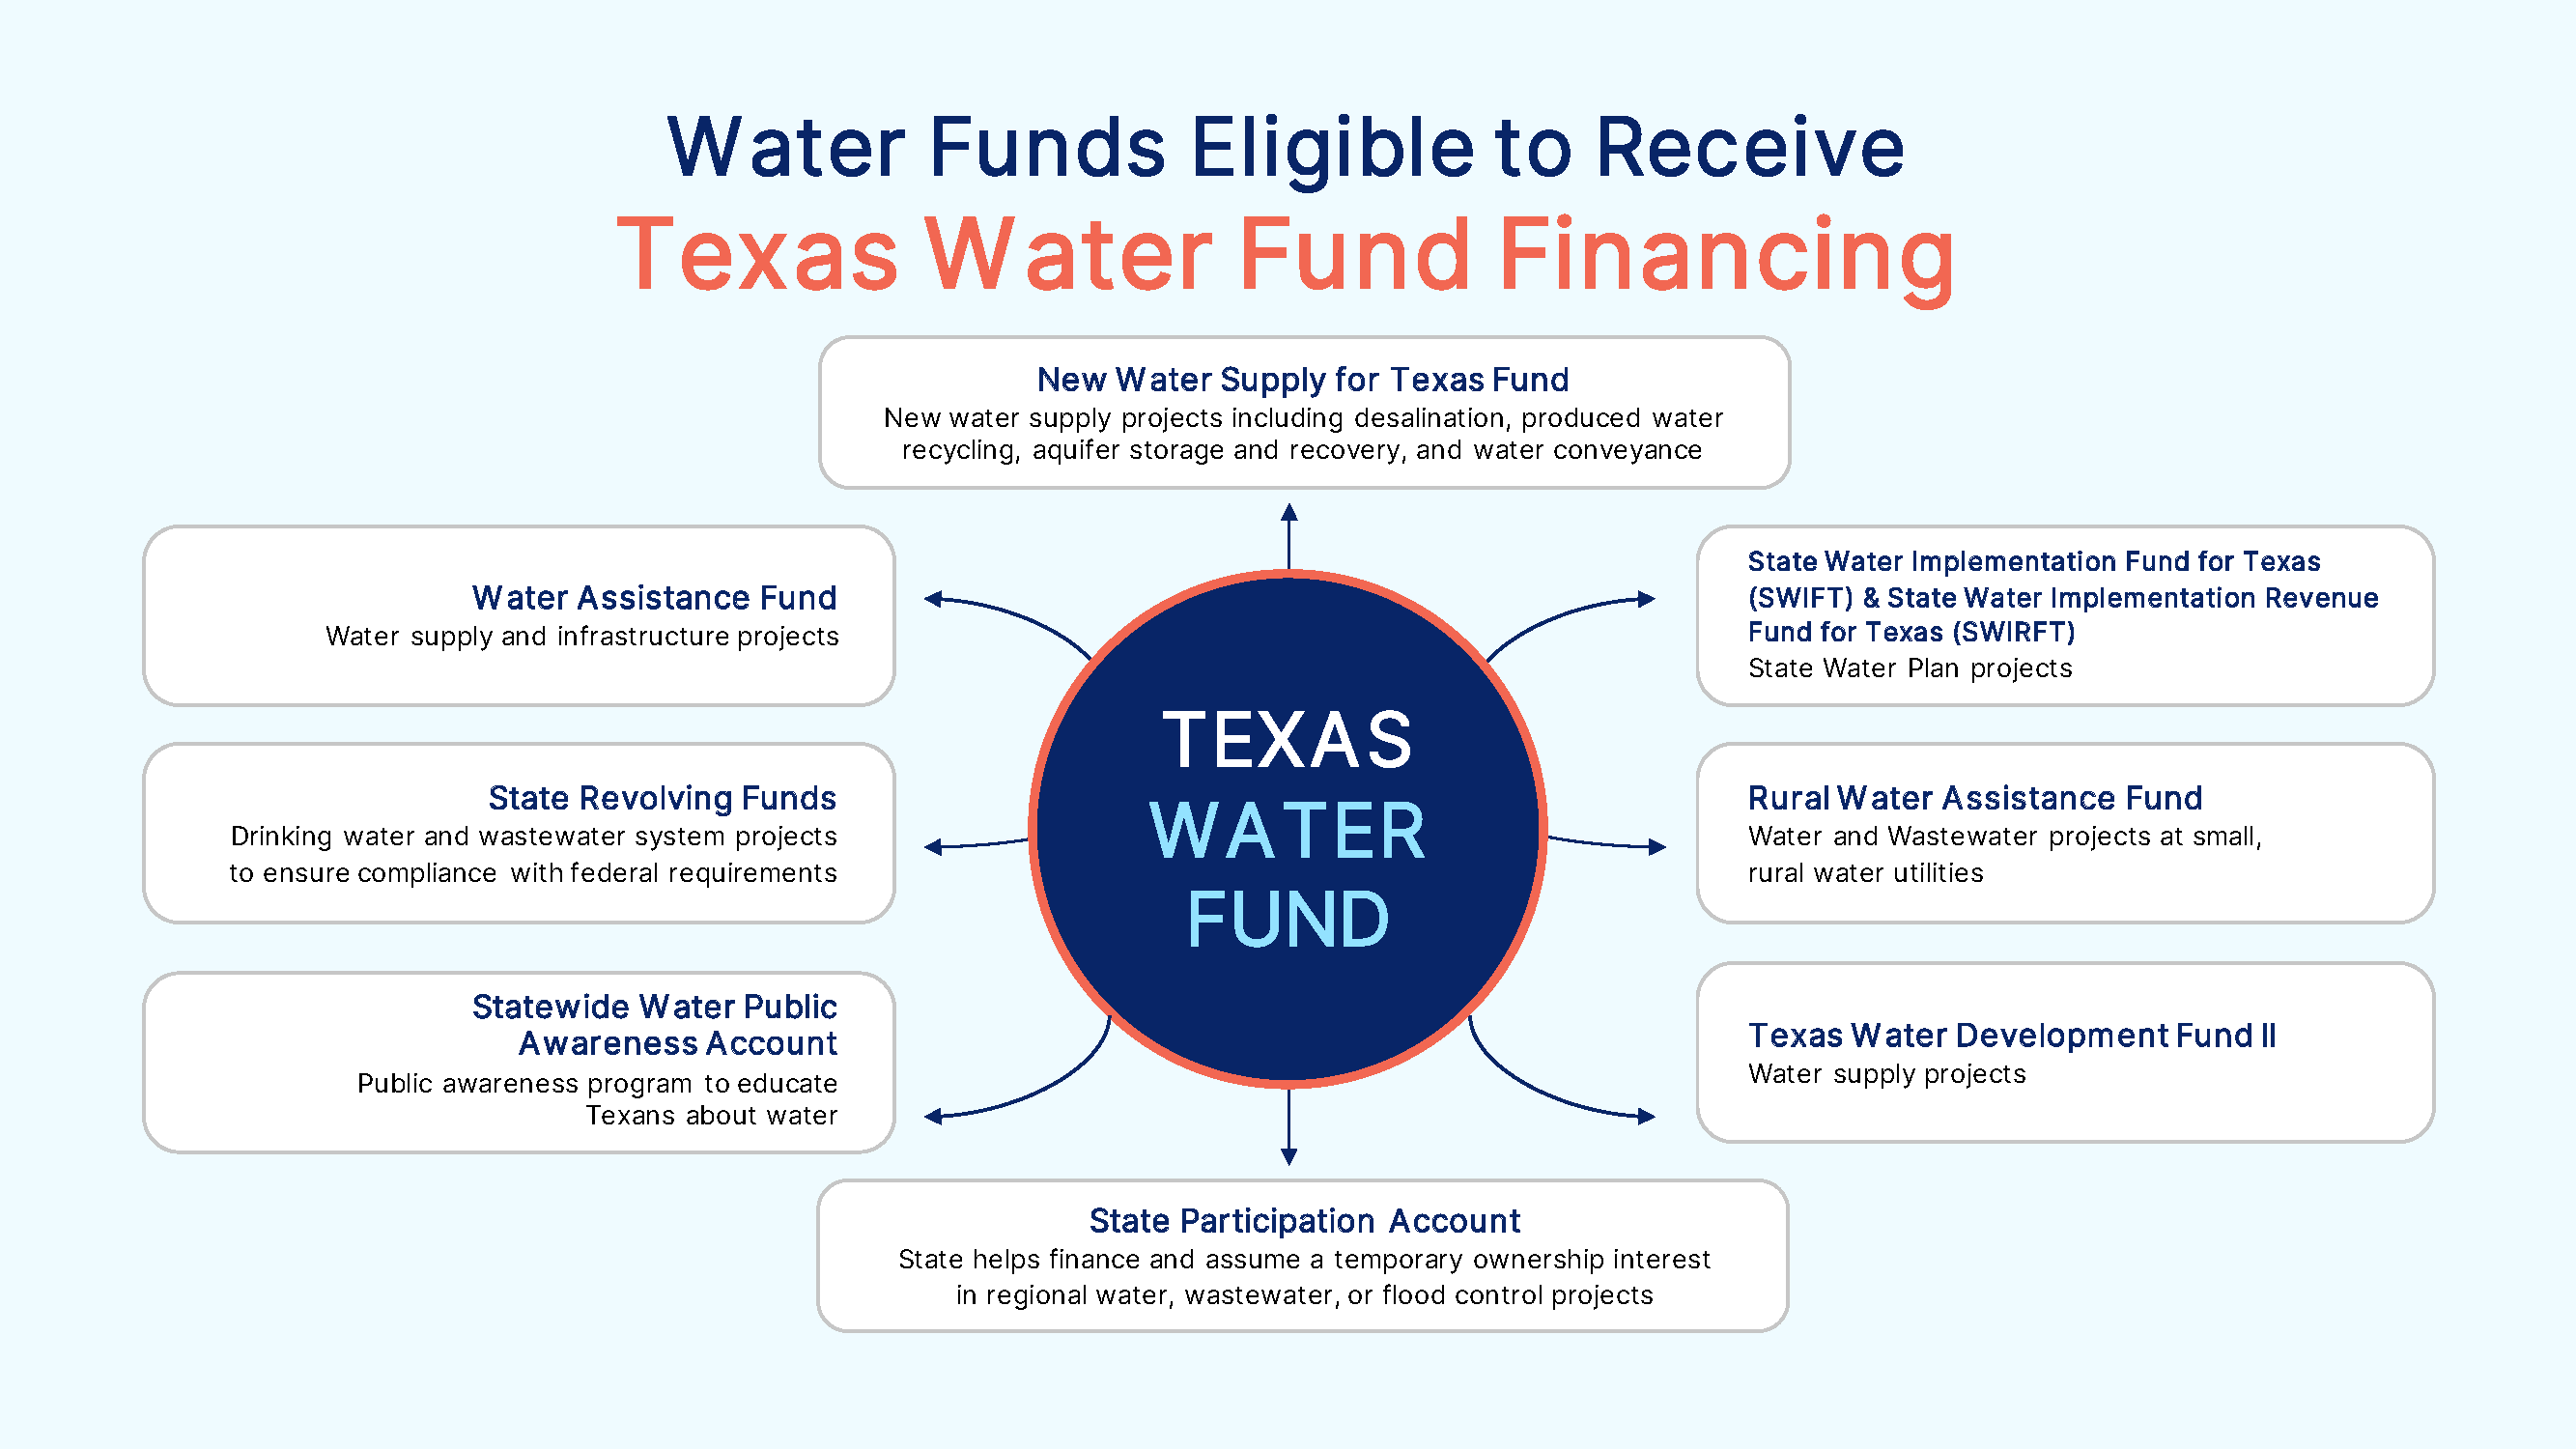 Water Funds Eligible to Receive Texas Water Fund Financing